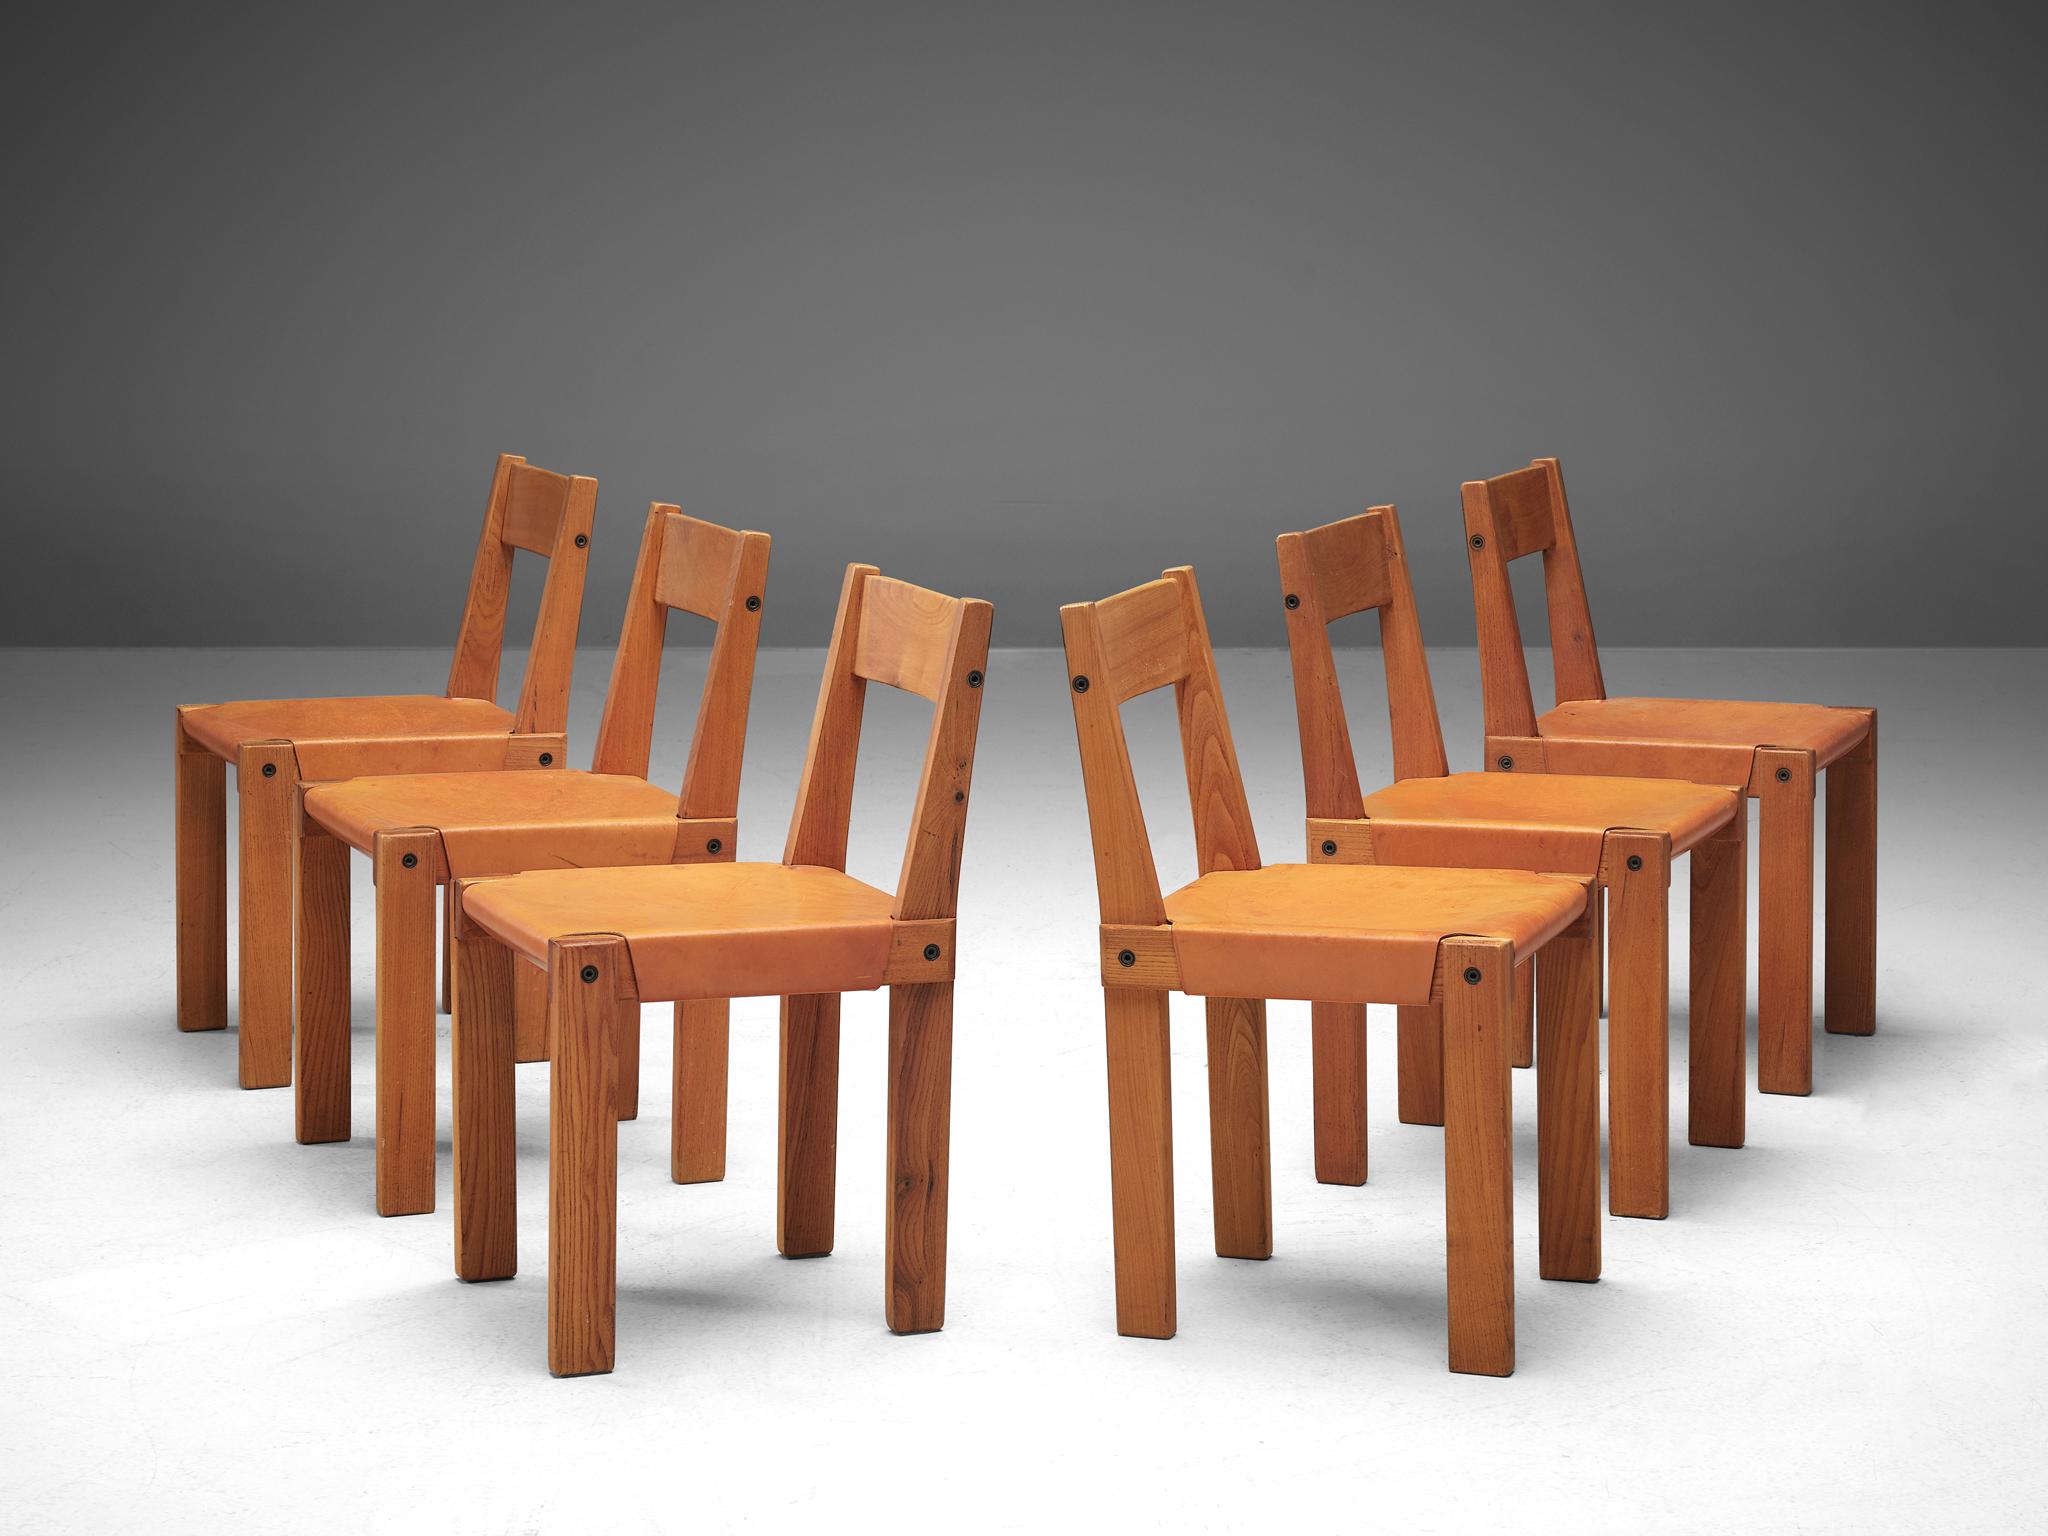 Pierre Chapo, set of six dining chairs, model S24, elm and leather, France, circa 1966.

A set of 6 chairs in solid elmwood with saddle leather seating and back. Designed by French designer Pierre Chapo in Paris. These chairs have a cubic design